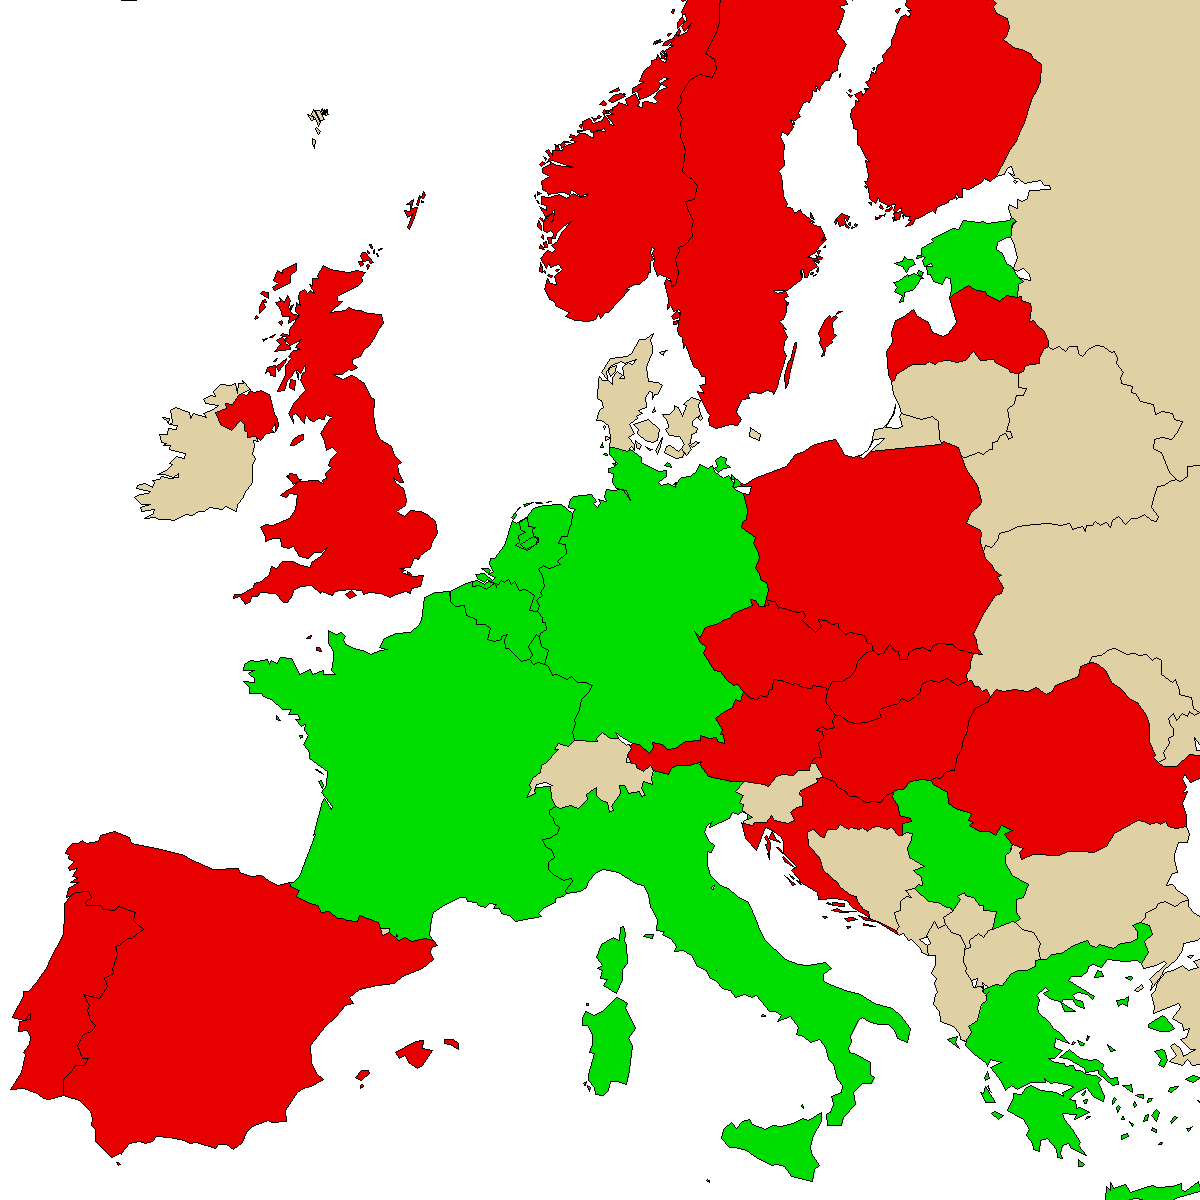 legal info map for our product 4HO-MET, green are countries with no ban, red with ban, grey is unknown